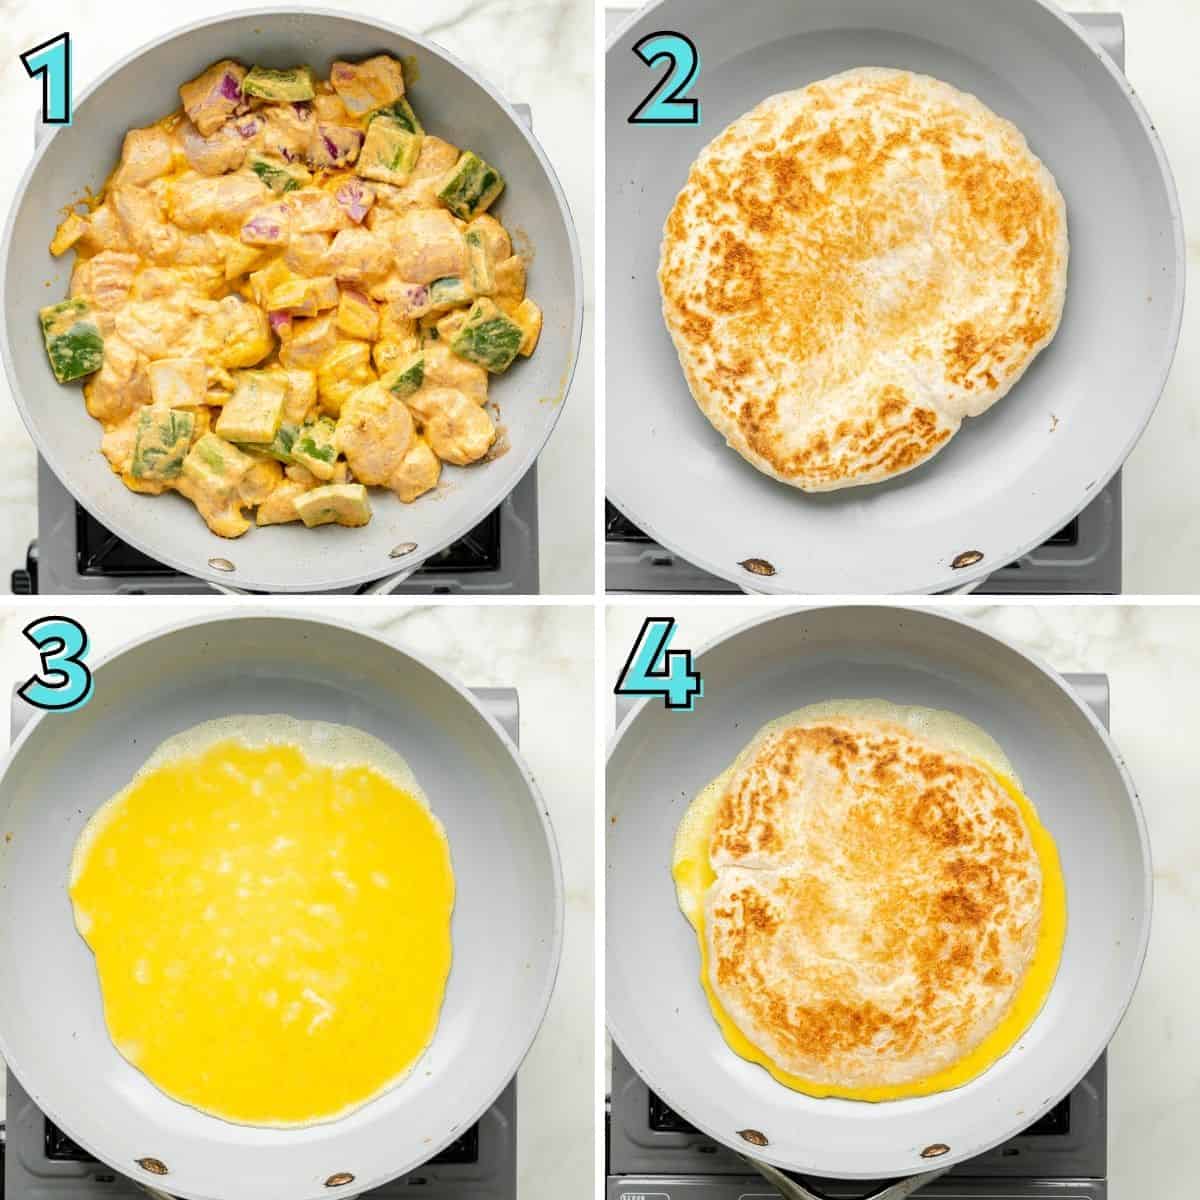 Step by step instructions to make chicken wraps, in a collage.